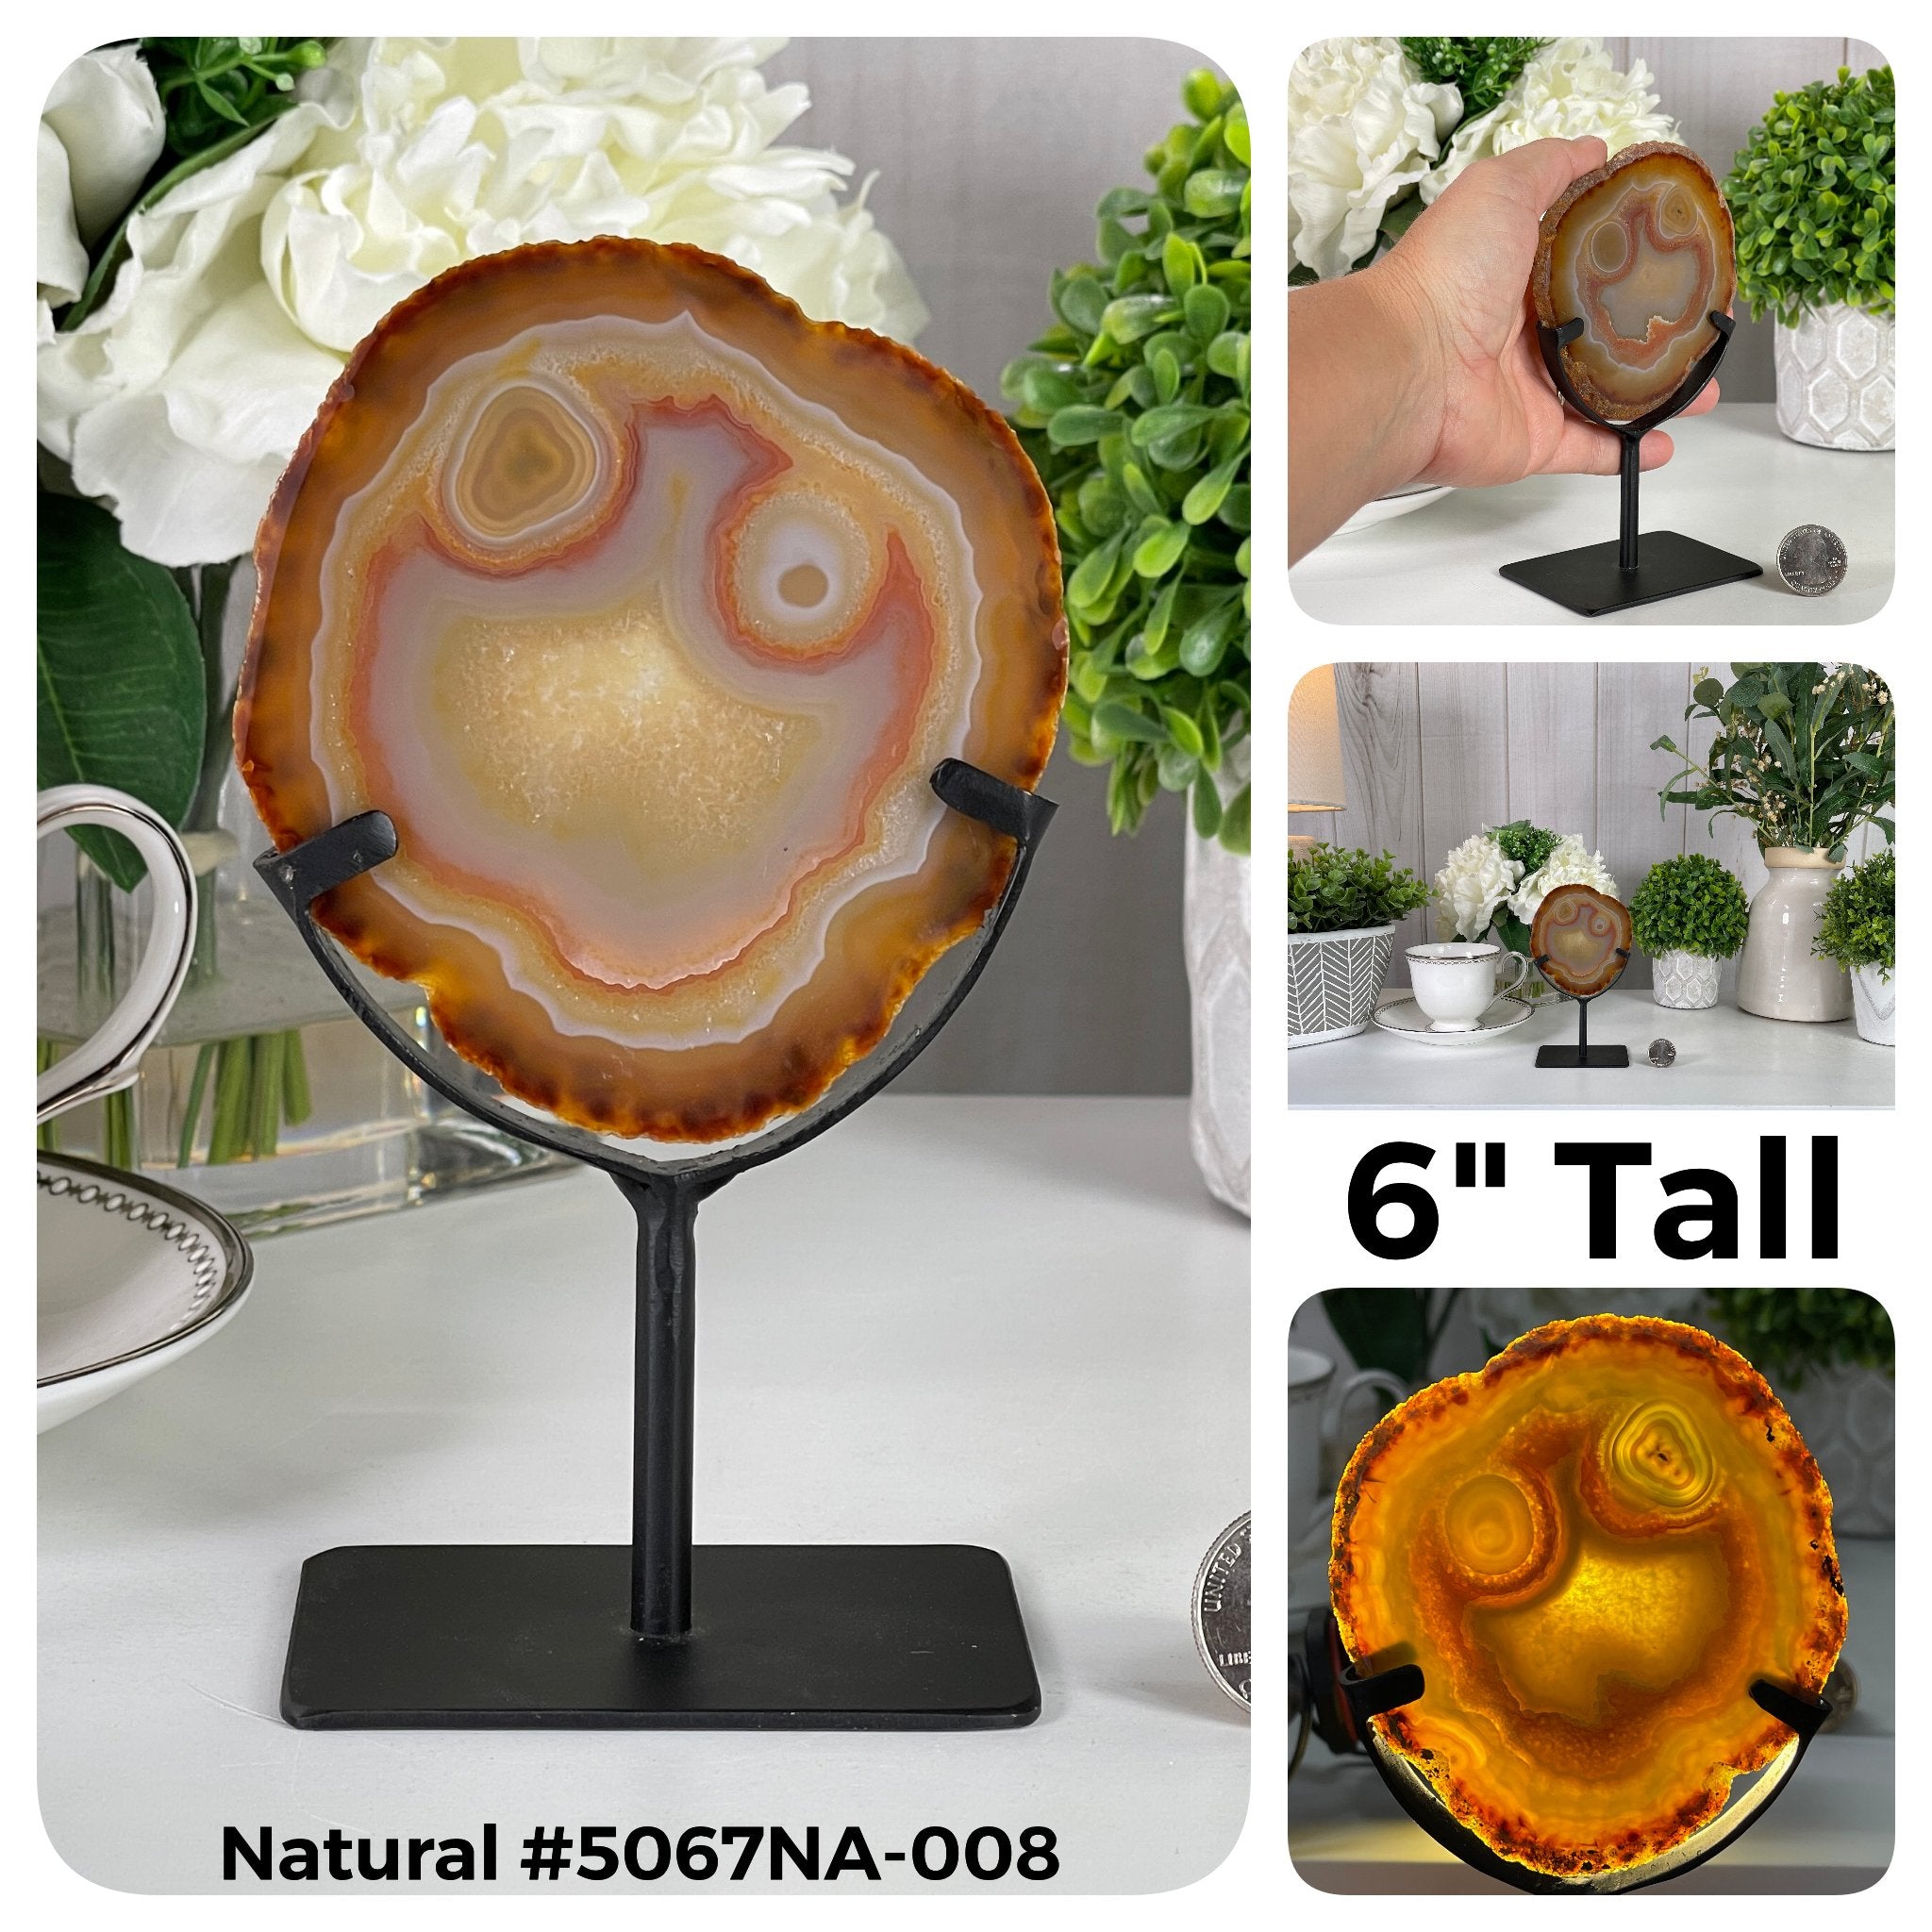 Special Smaller Natural Brazilian Agate Slices on Metal Stands Model #5067 by Brazil Gems - Brazil GemsBrazil GemsSpecial Smaller Natural Brazilian Agate Slices on Metal Stands Model #5067 by Brazil GemsSlices on Fixed Bases5067NA-008